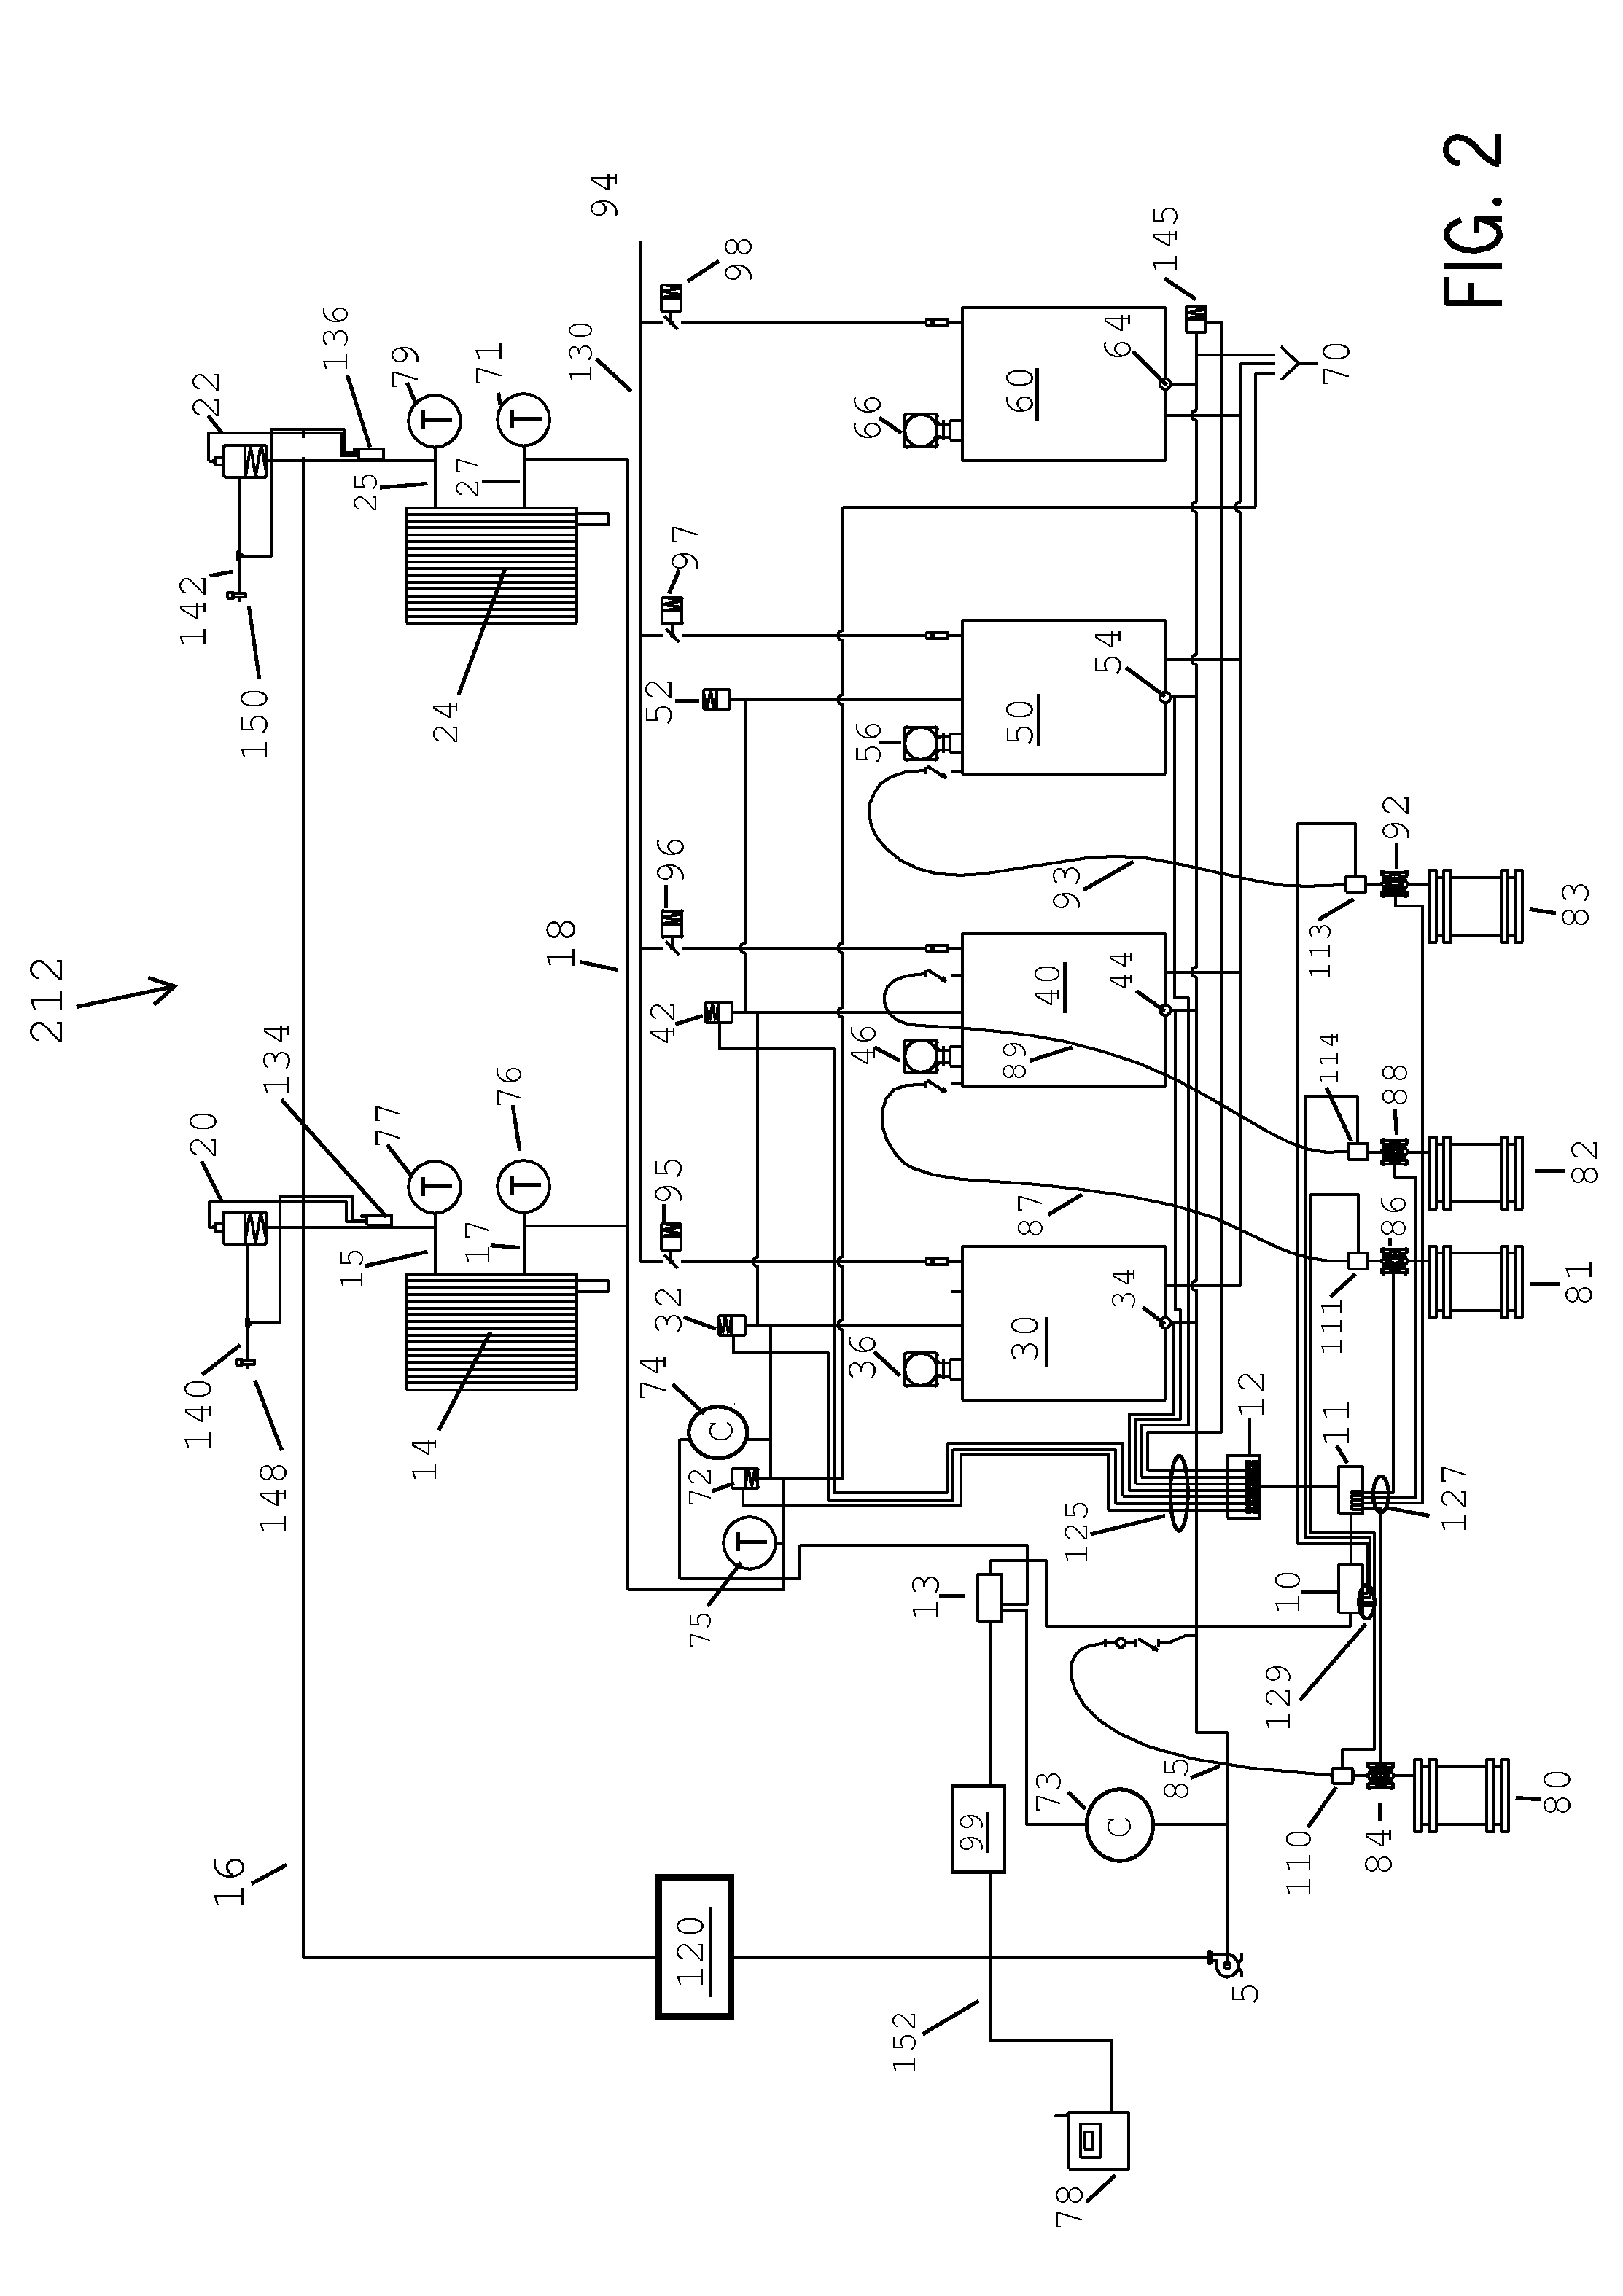 Monitoring and Recording Device for Clean-In-Place System